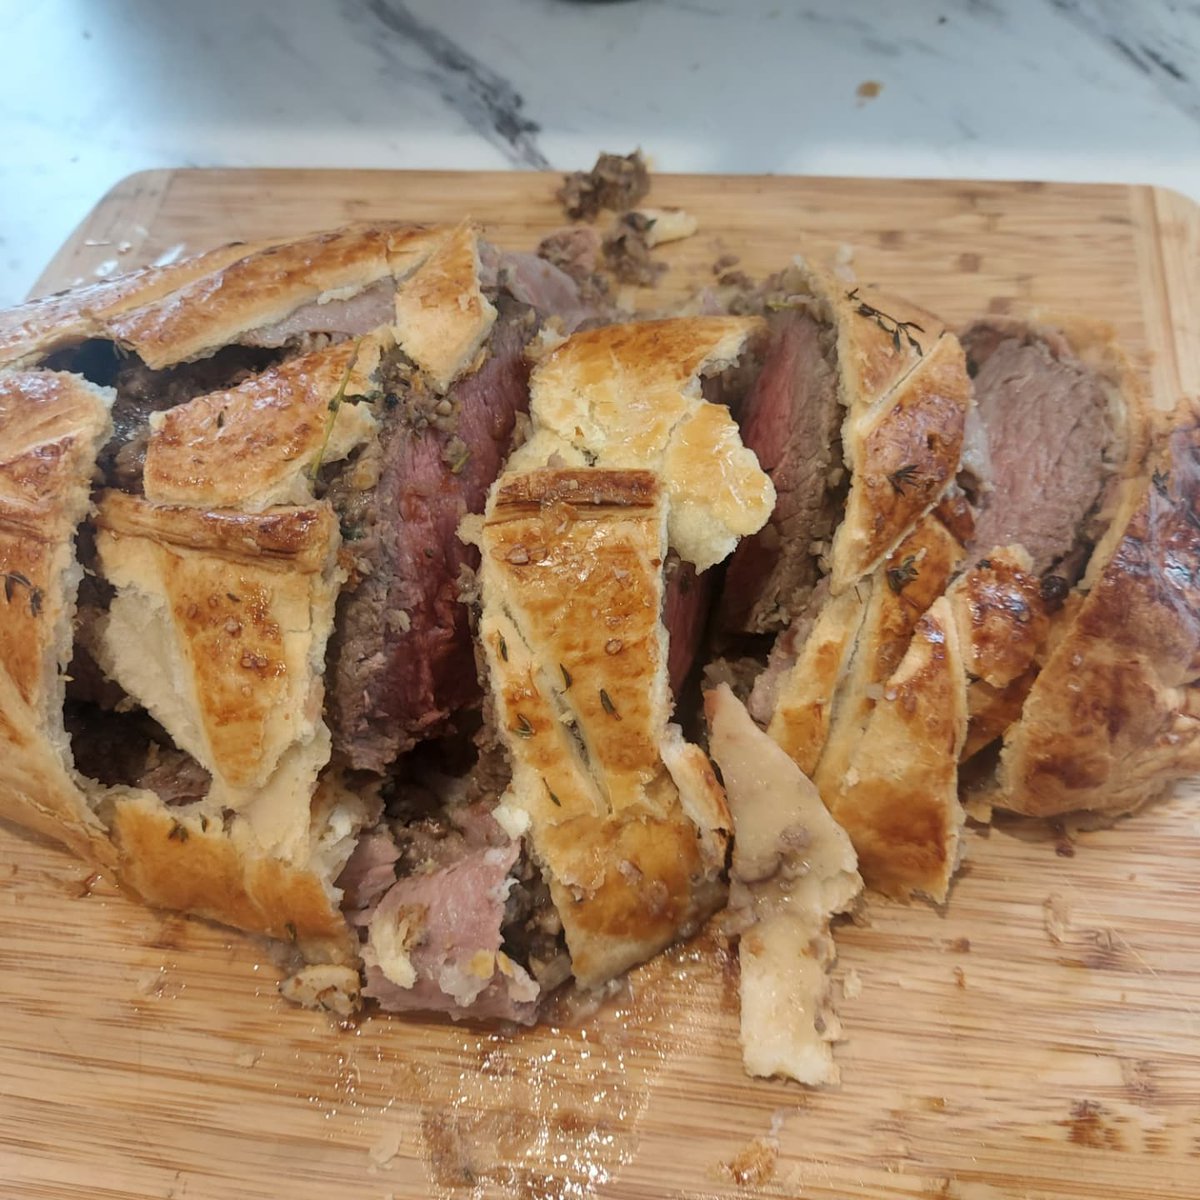 My first ever attempt at a beef Wellington... Followed Gordon Ramsay's Christmas Wellington on YouTube to make it. Pretty pleased with the end results. What do you think, @GordonRamsay ? https://t.co/maTm6ql27u